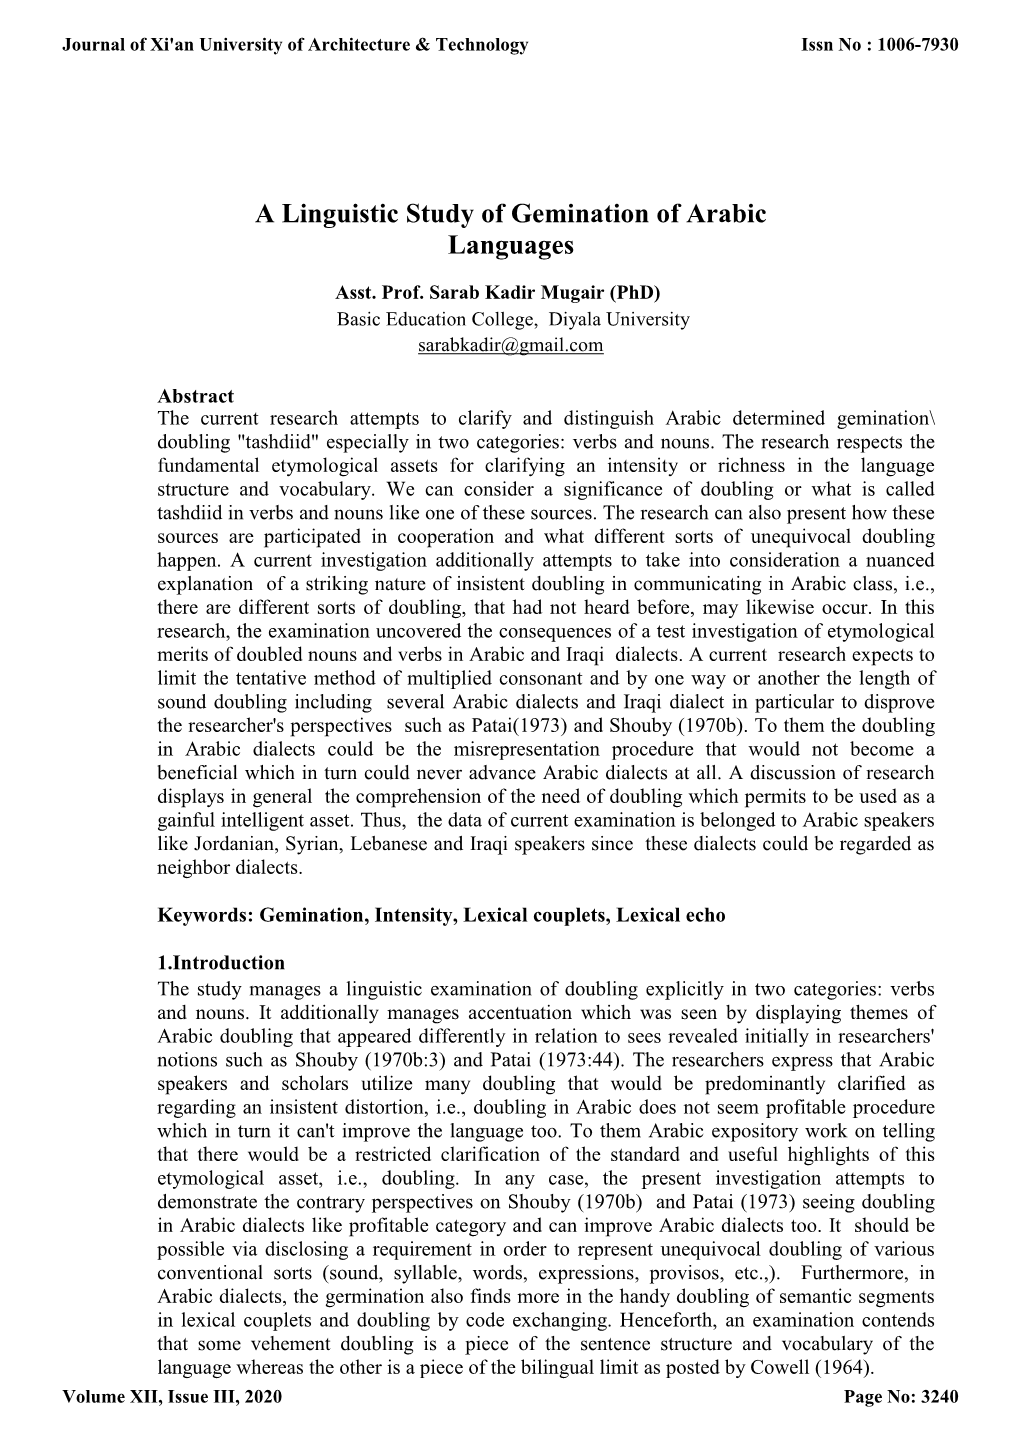 A Linguistic Study of Gemination of Arabic Languages